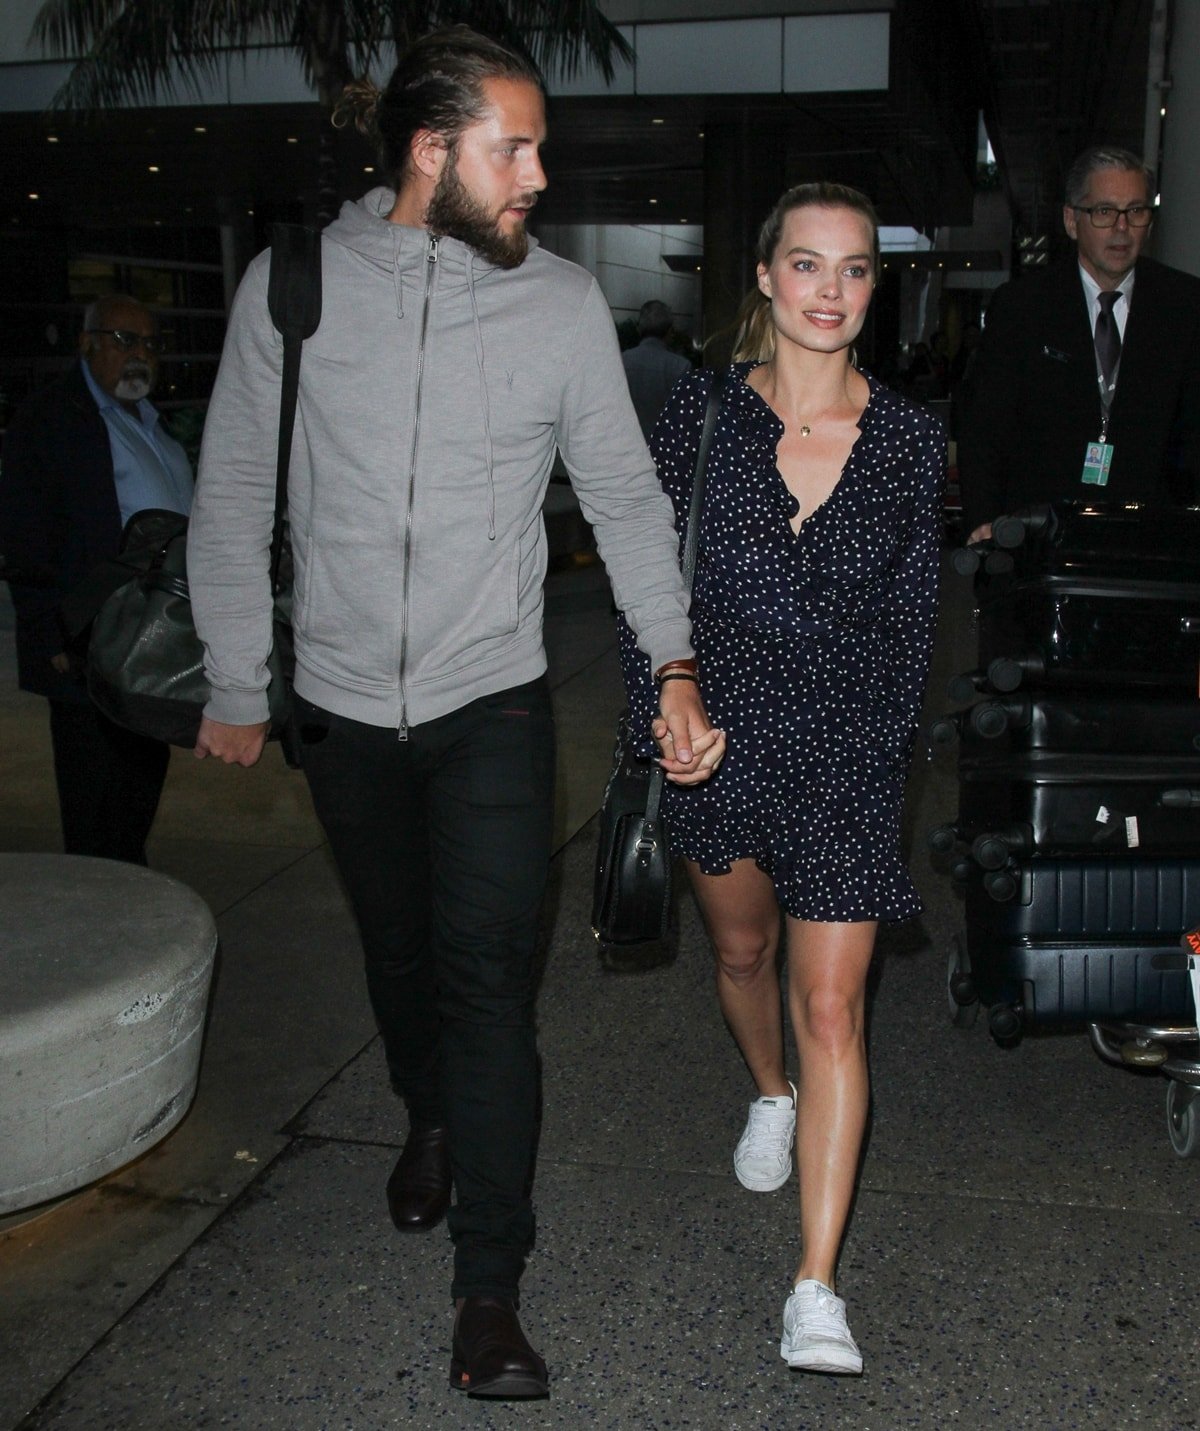 Tom Ackerley stands at a height of 6 feet 3¼ inches (1.91 meters), making him notably taller than Margot Robbie, who is 5 feet 5 ½ inches (166.4 cm) when she's not wearing high heels